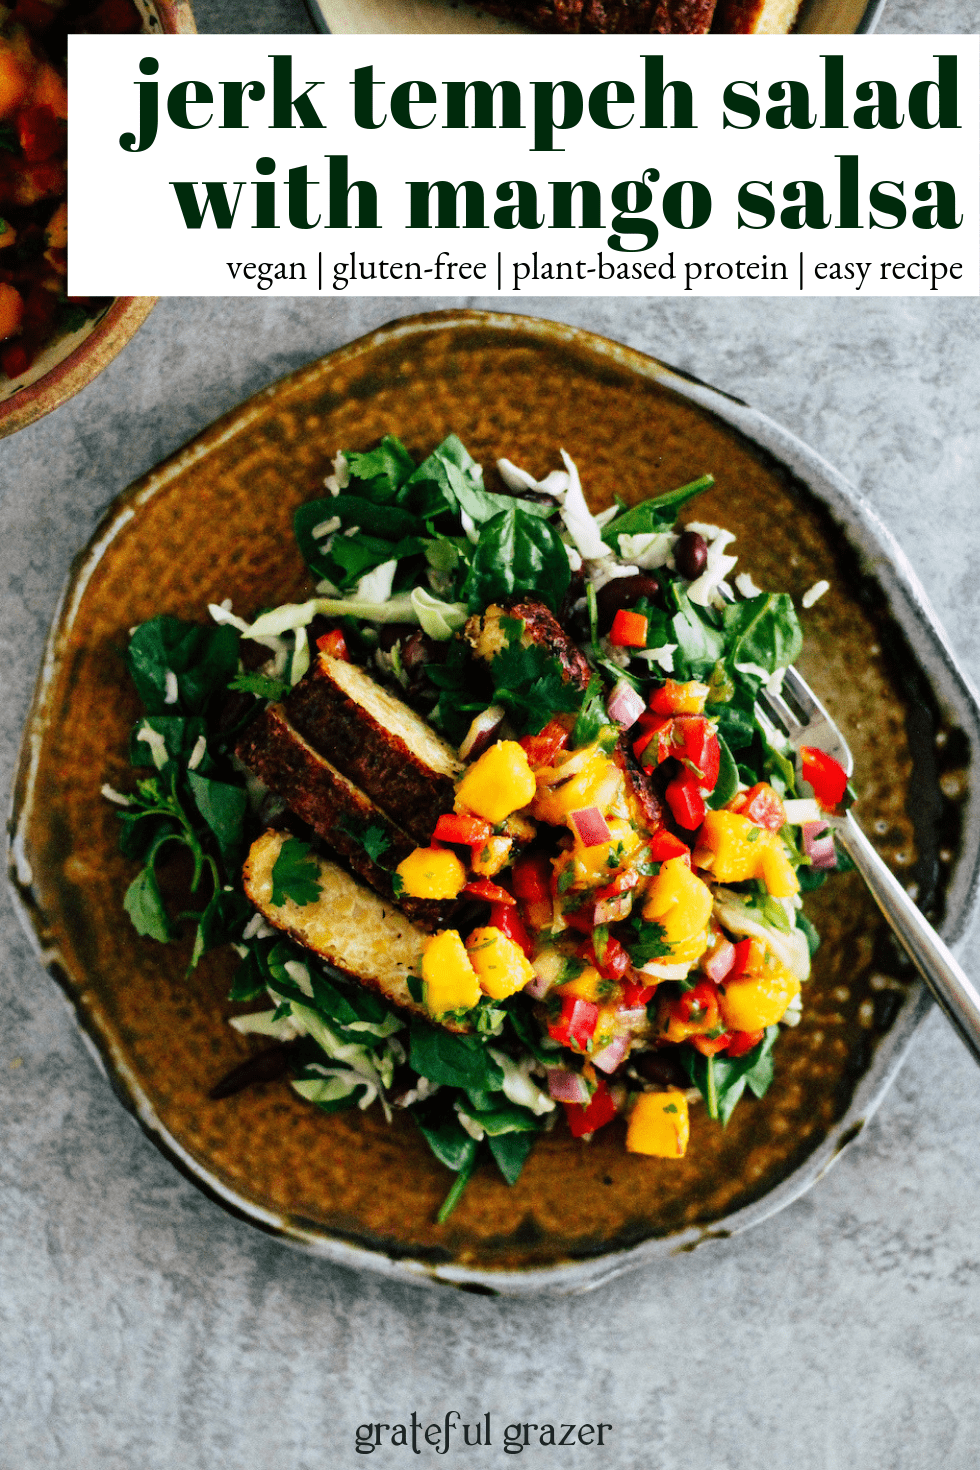 Tempeh salad with mango salsa and text that reads, "Jerk Tempeh Salad with Mango Salsa: vegan, gluten-free, plant-based protein, easy recipe"